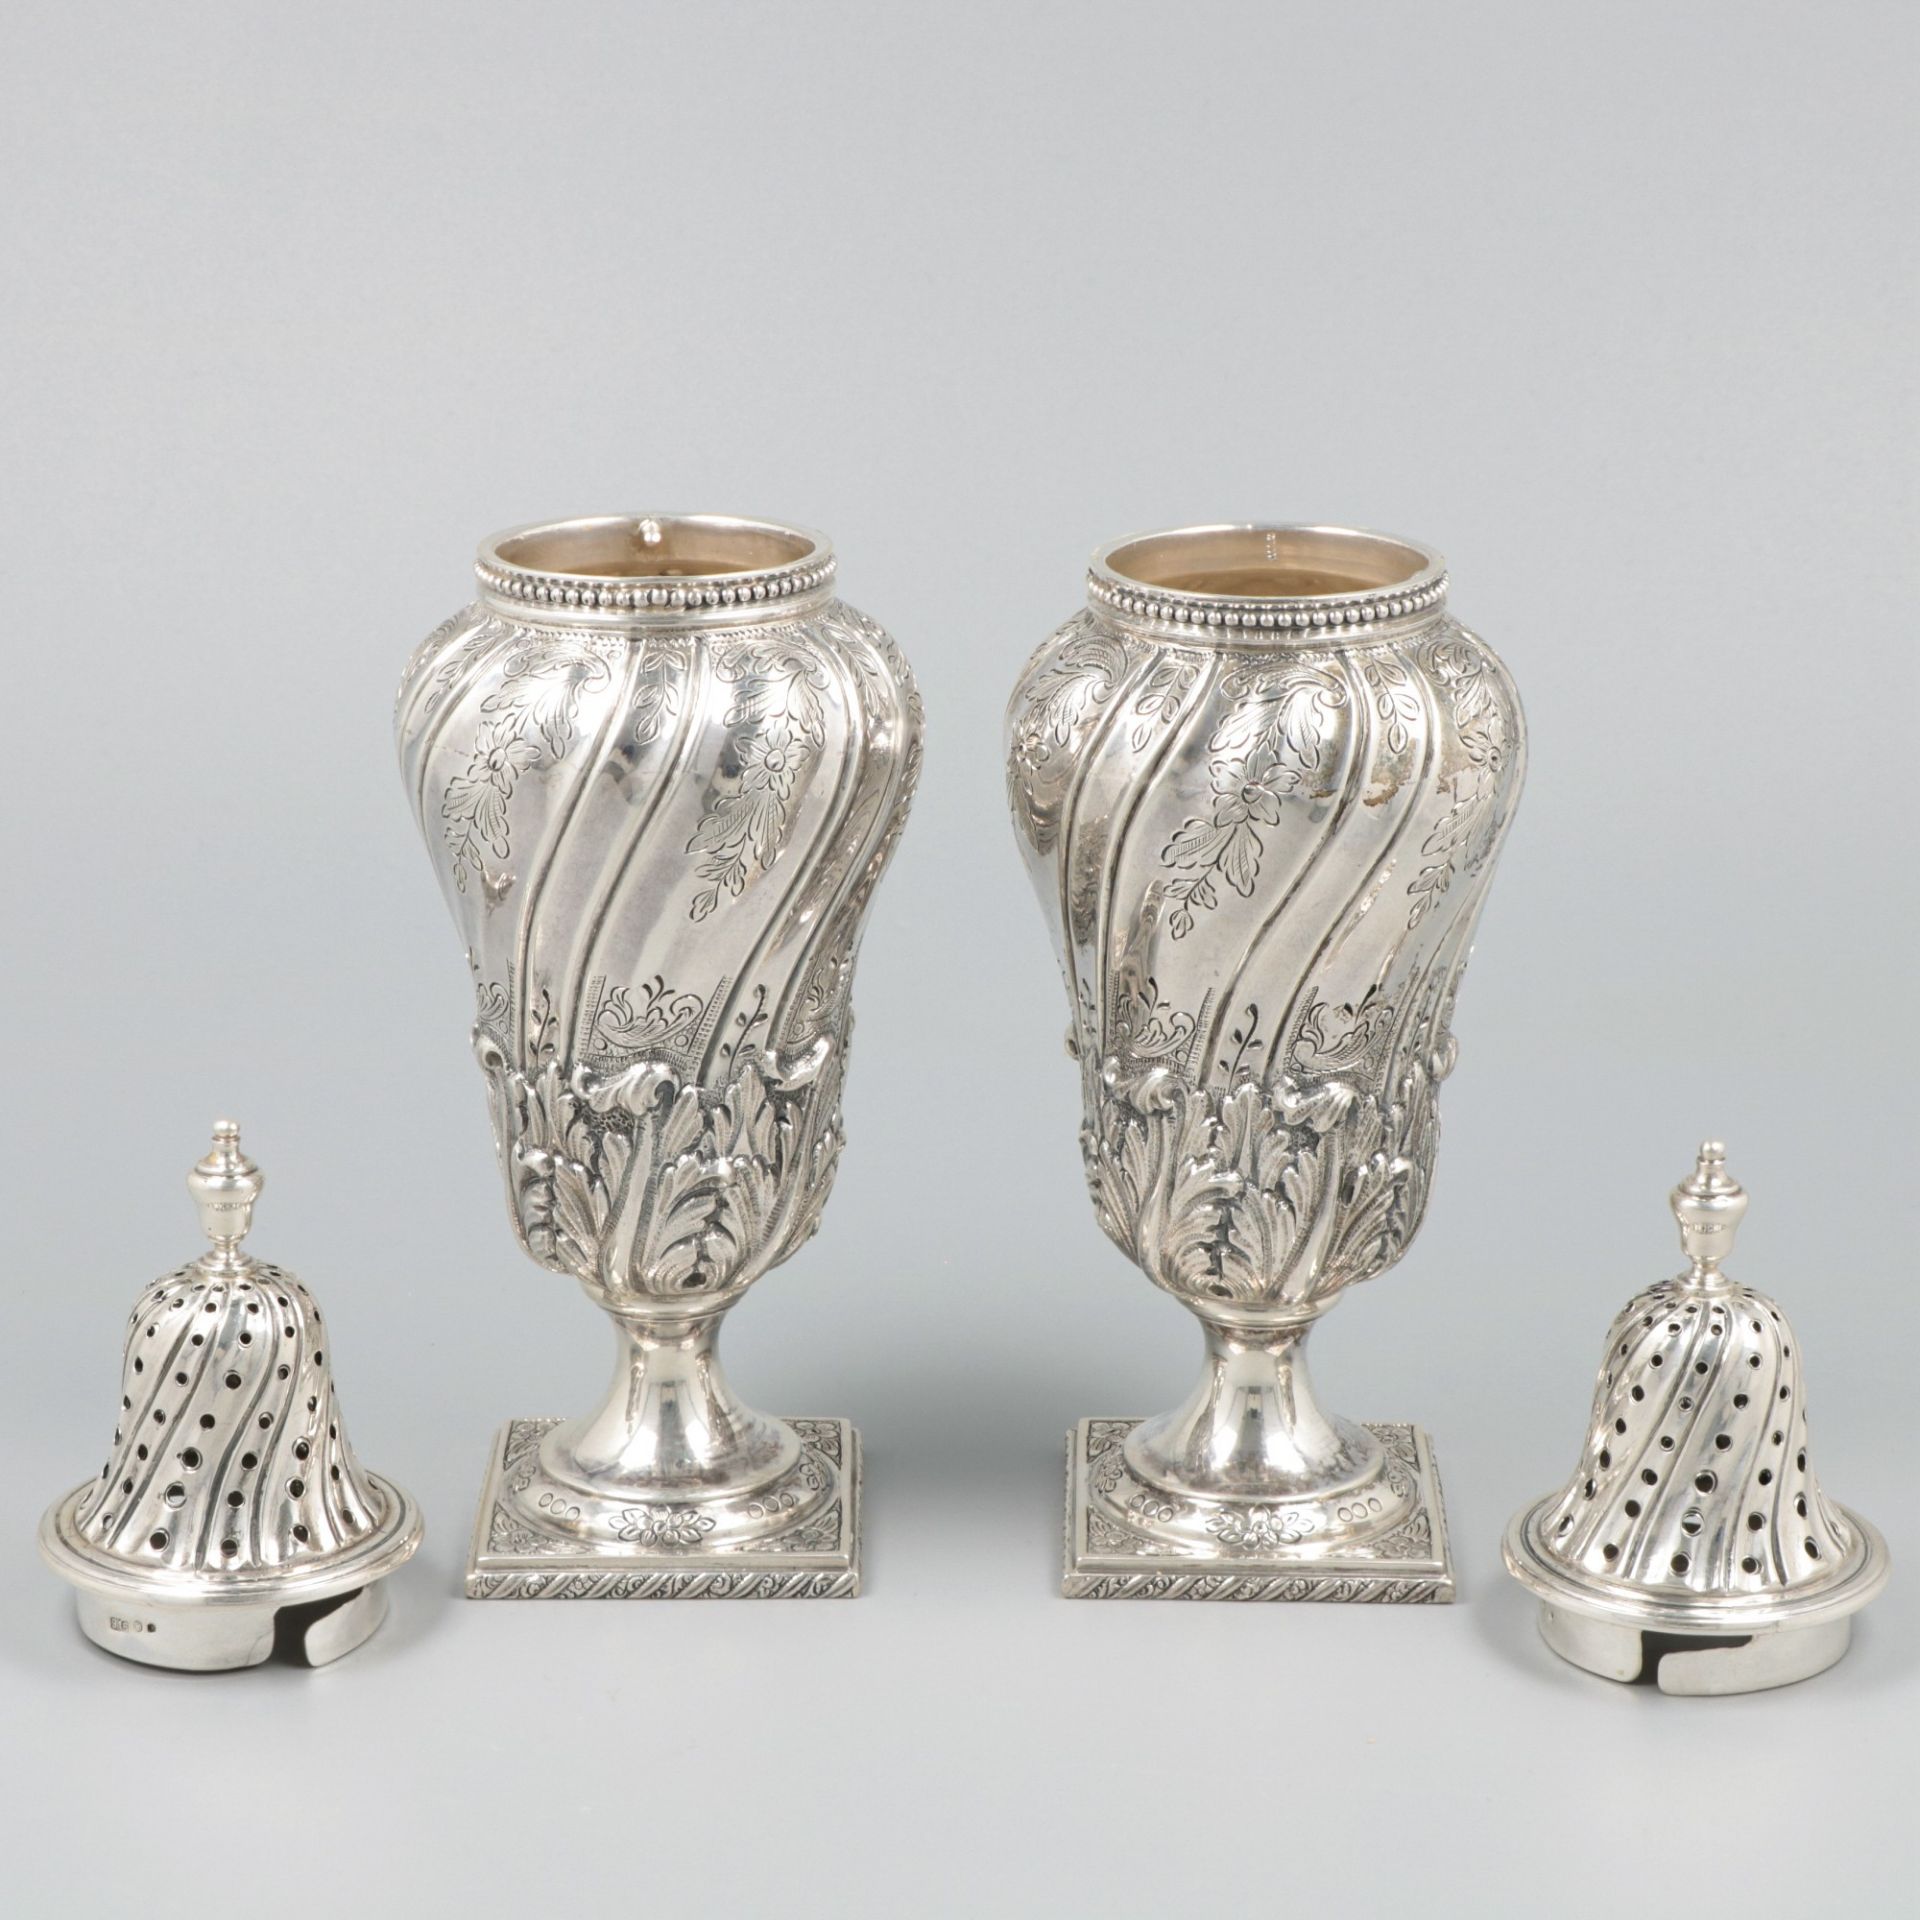 2-piece set of silver casters. - Image 3 of 7